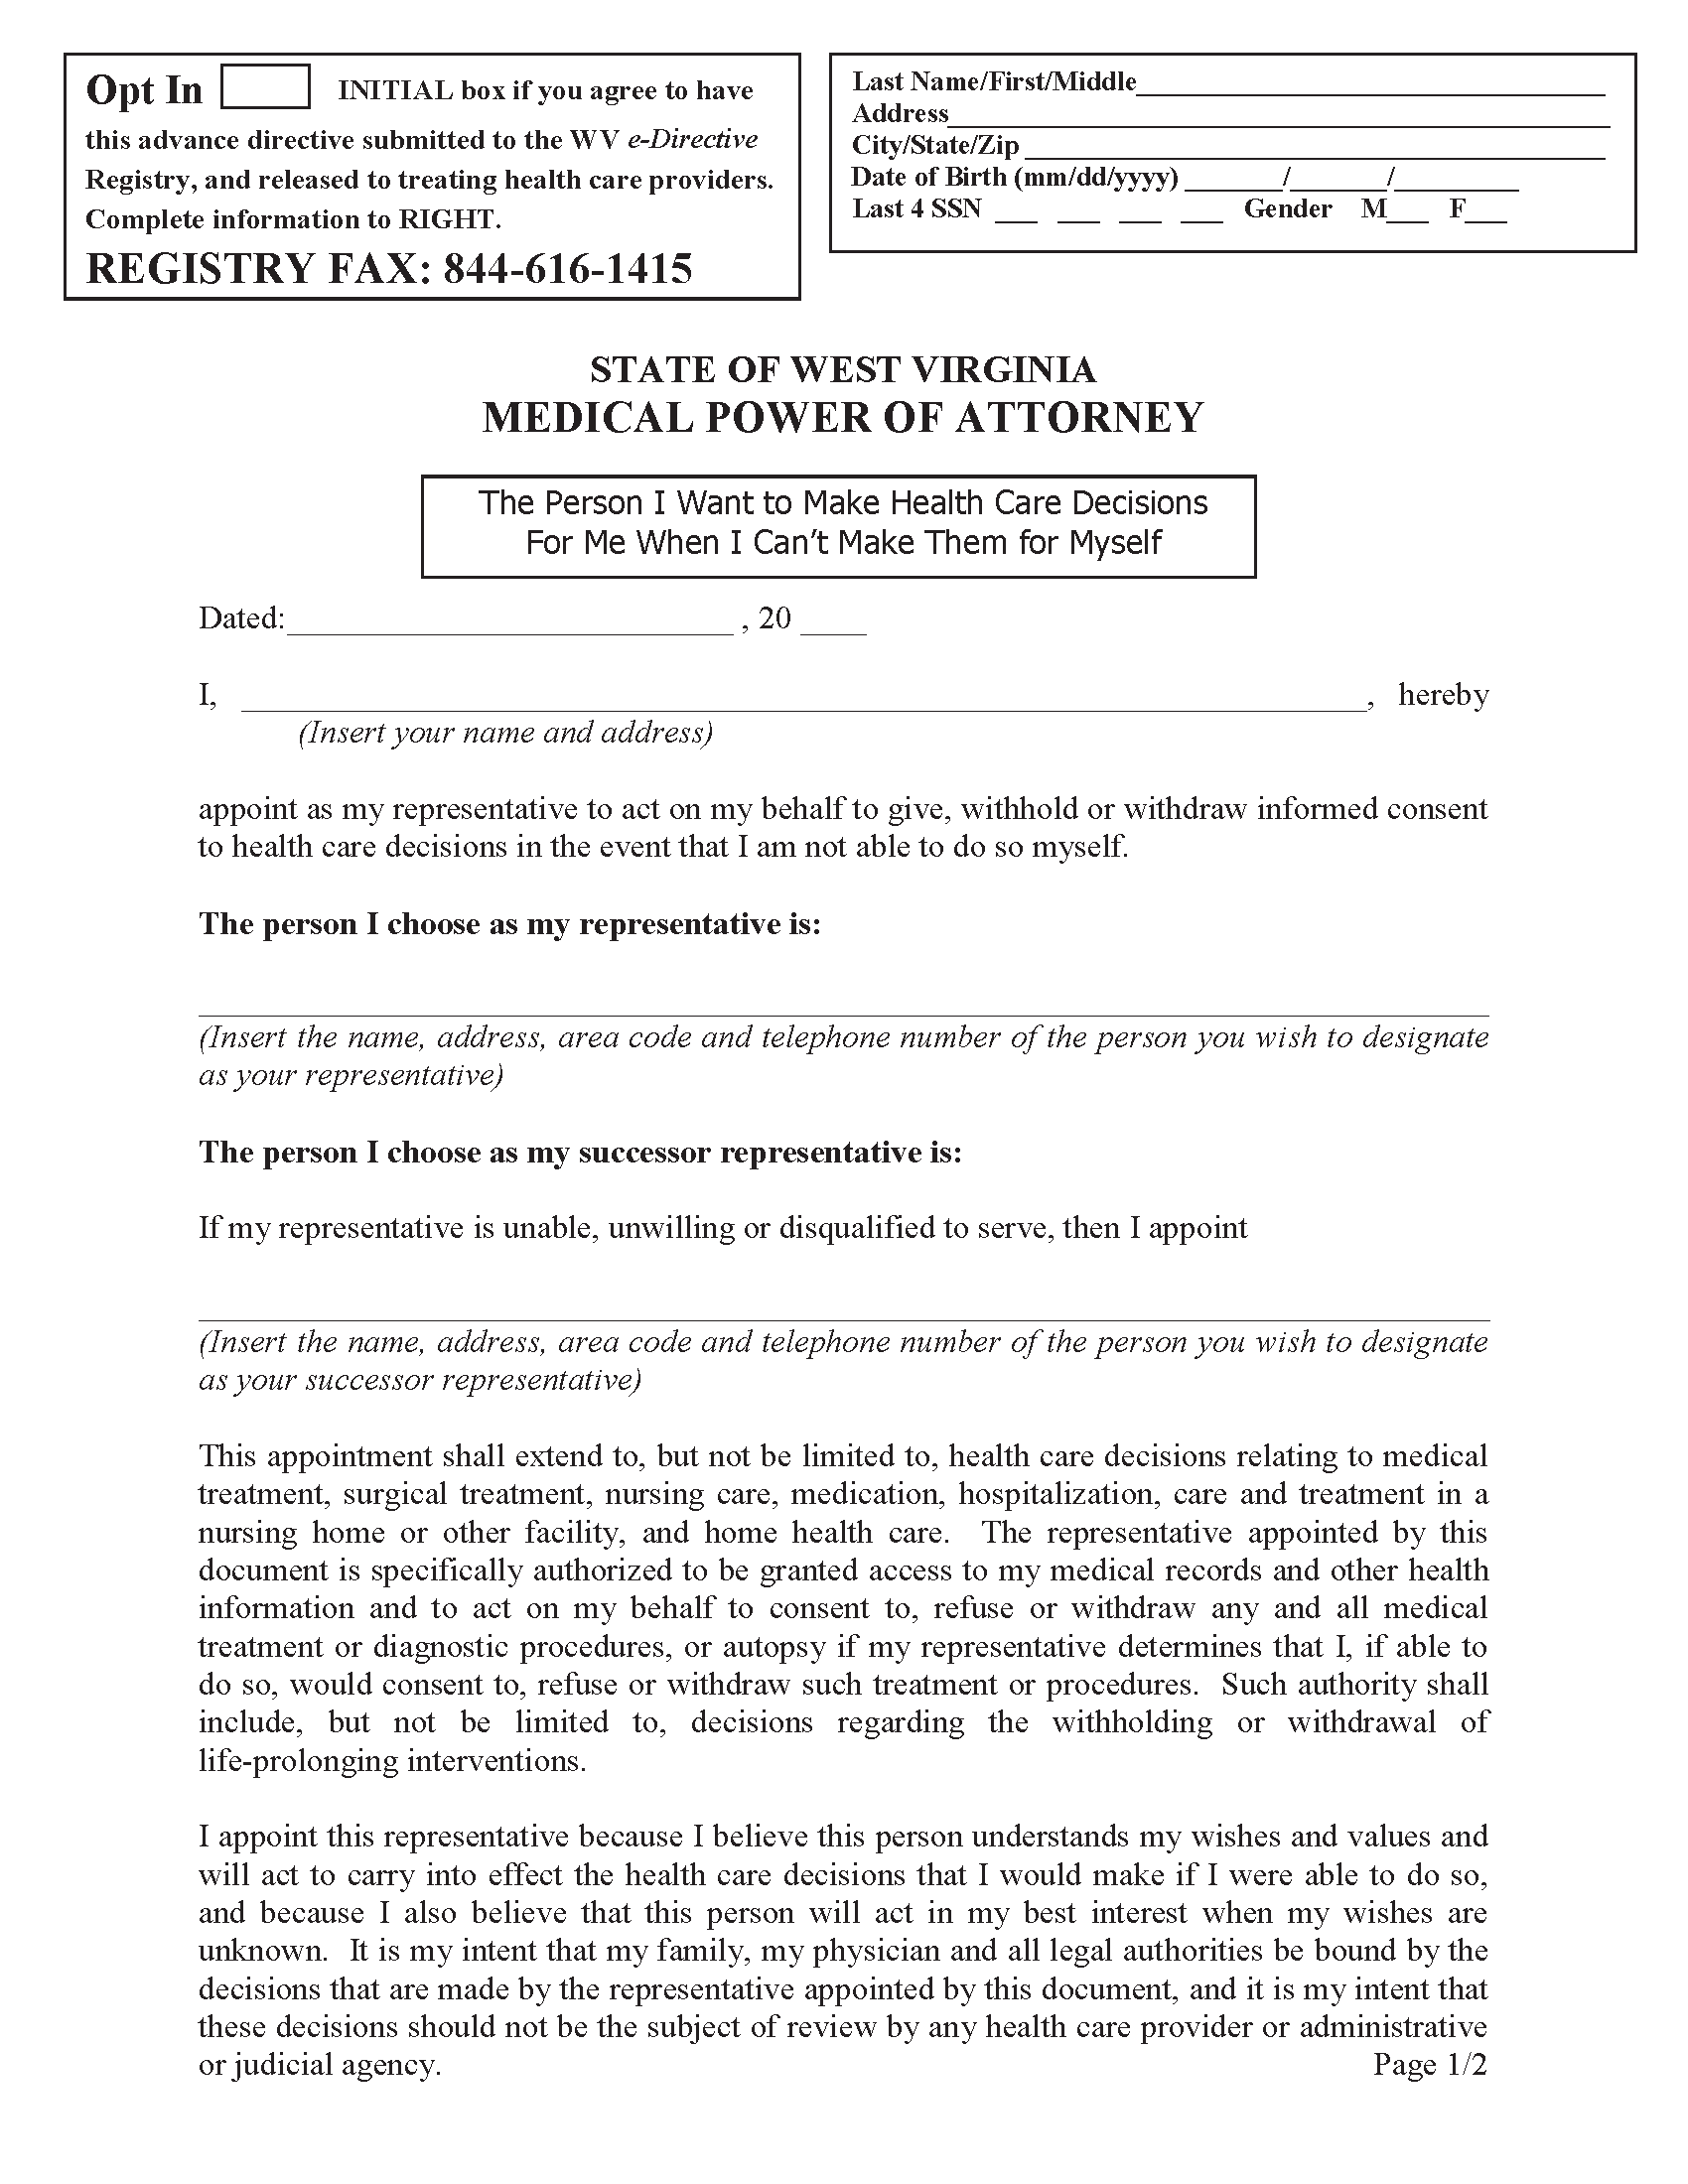 West Virginia Medical Power of Attorney PDF Free Printable Legal Forms